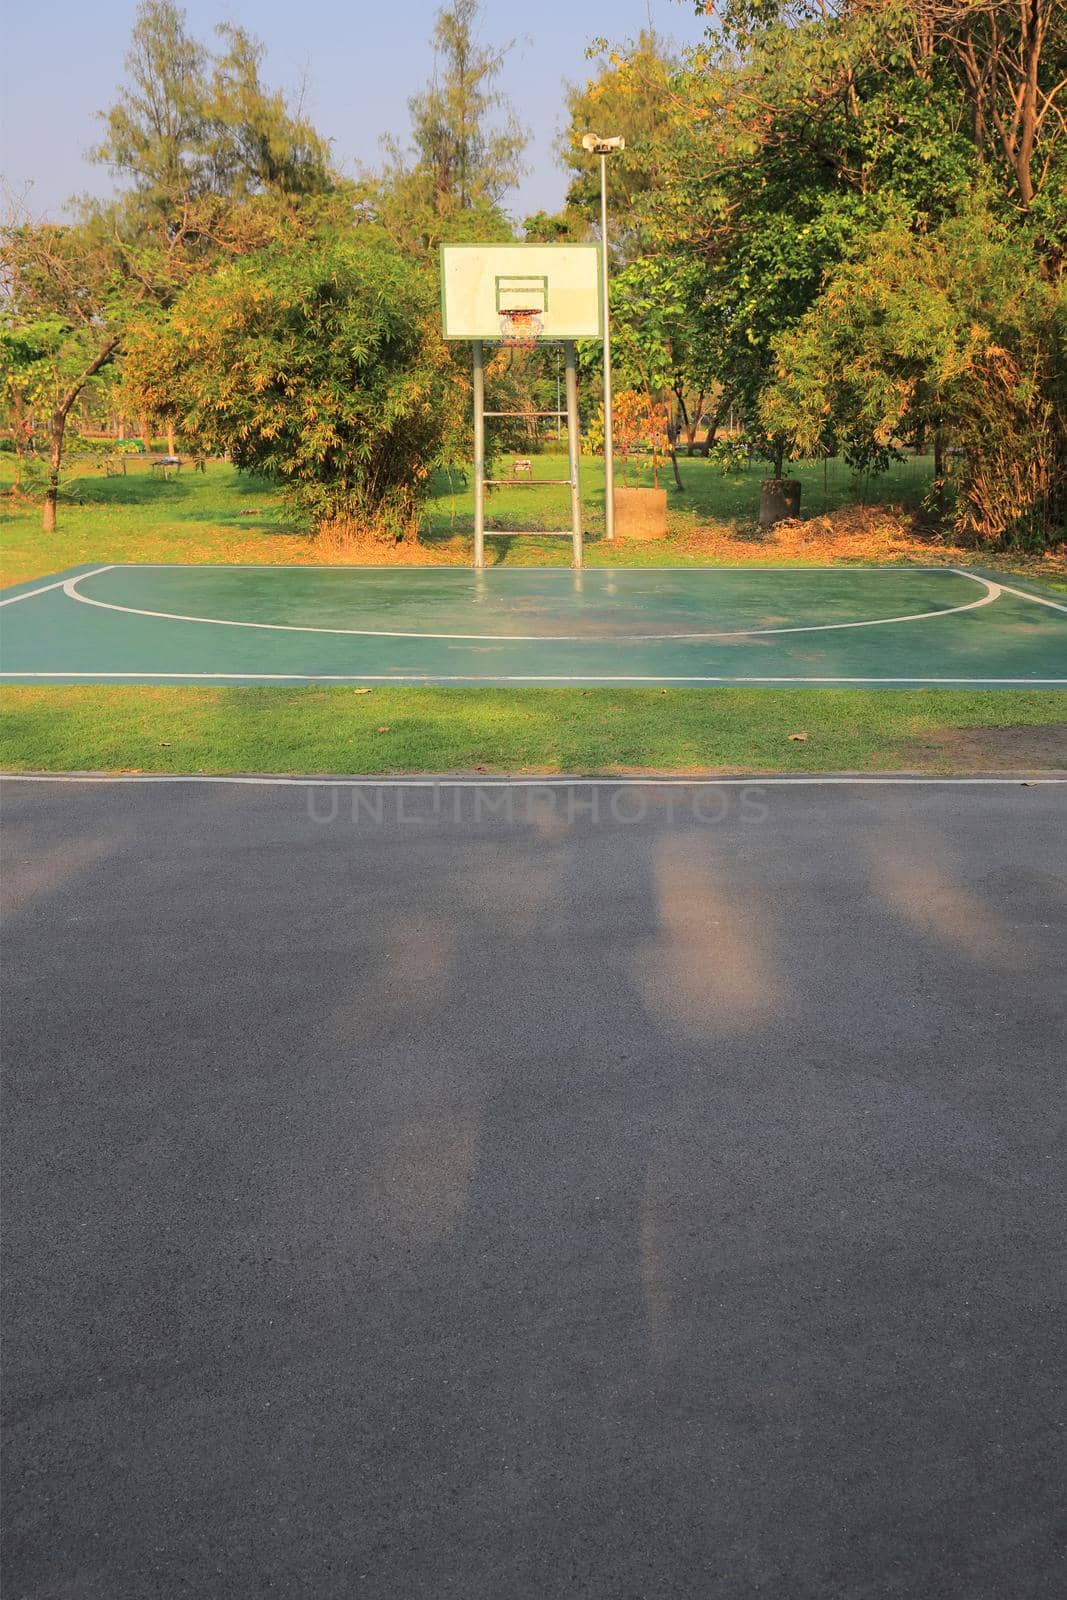 Basketball court That has only one basketball hoop in the park